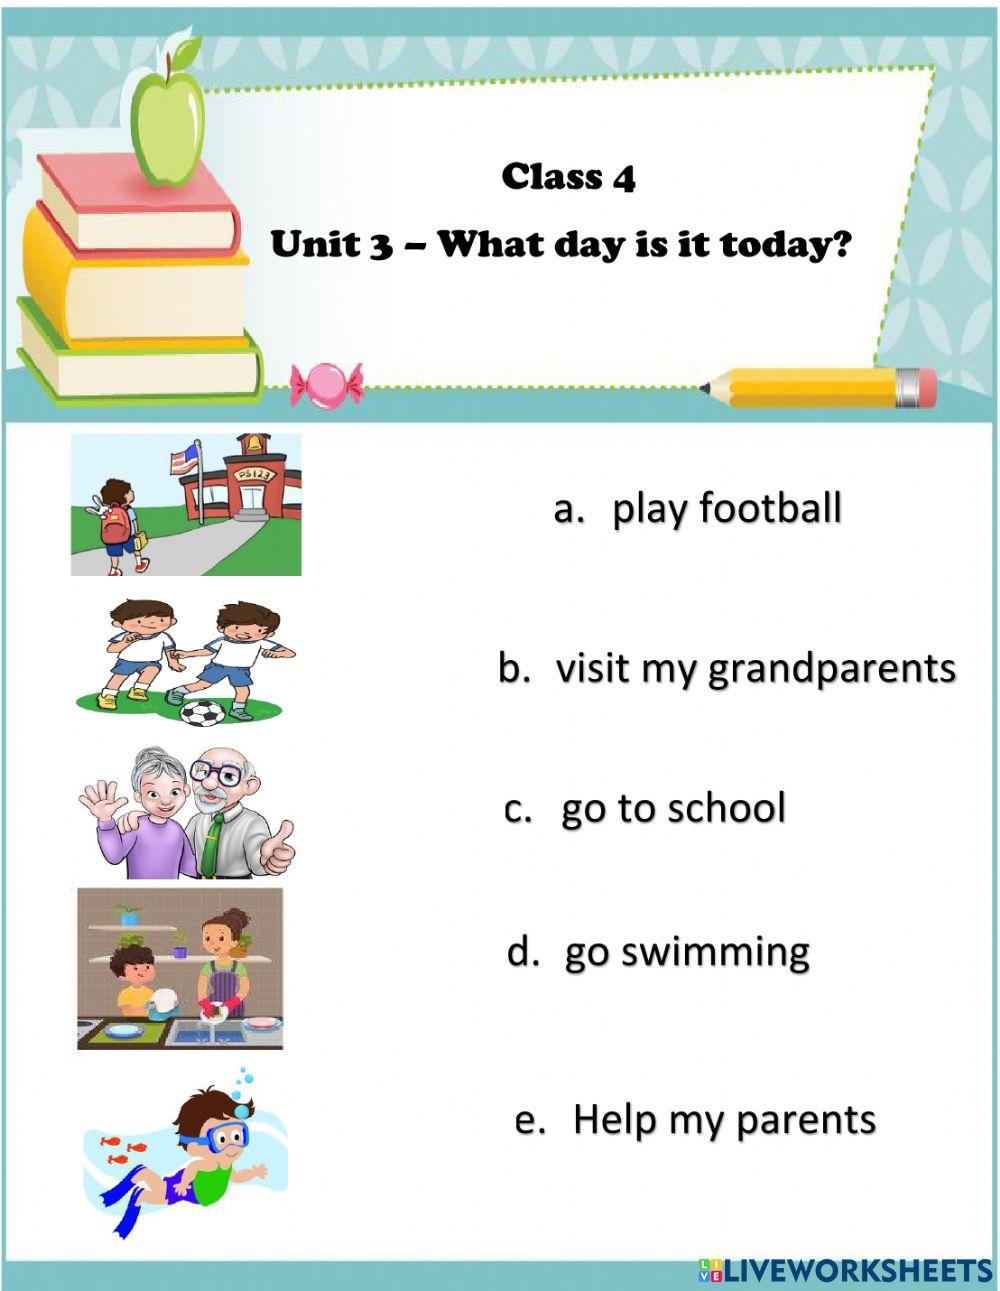 What day is it today? Class 4 - Unit 3